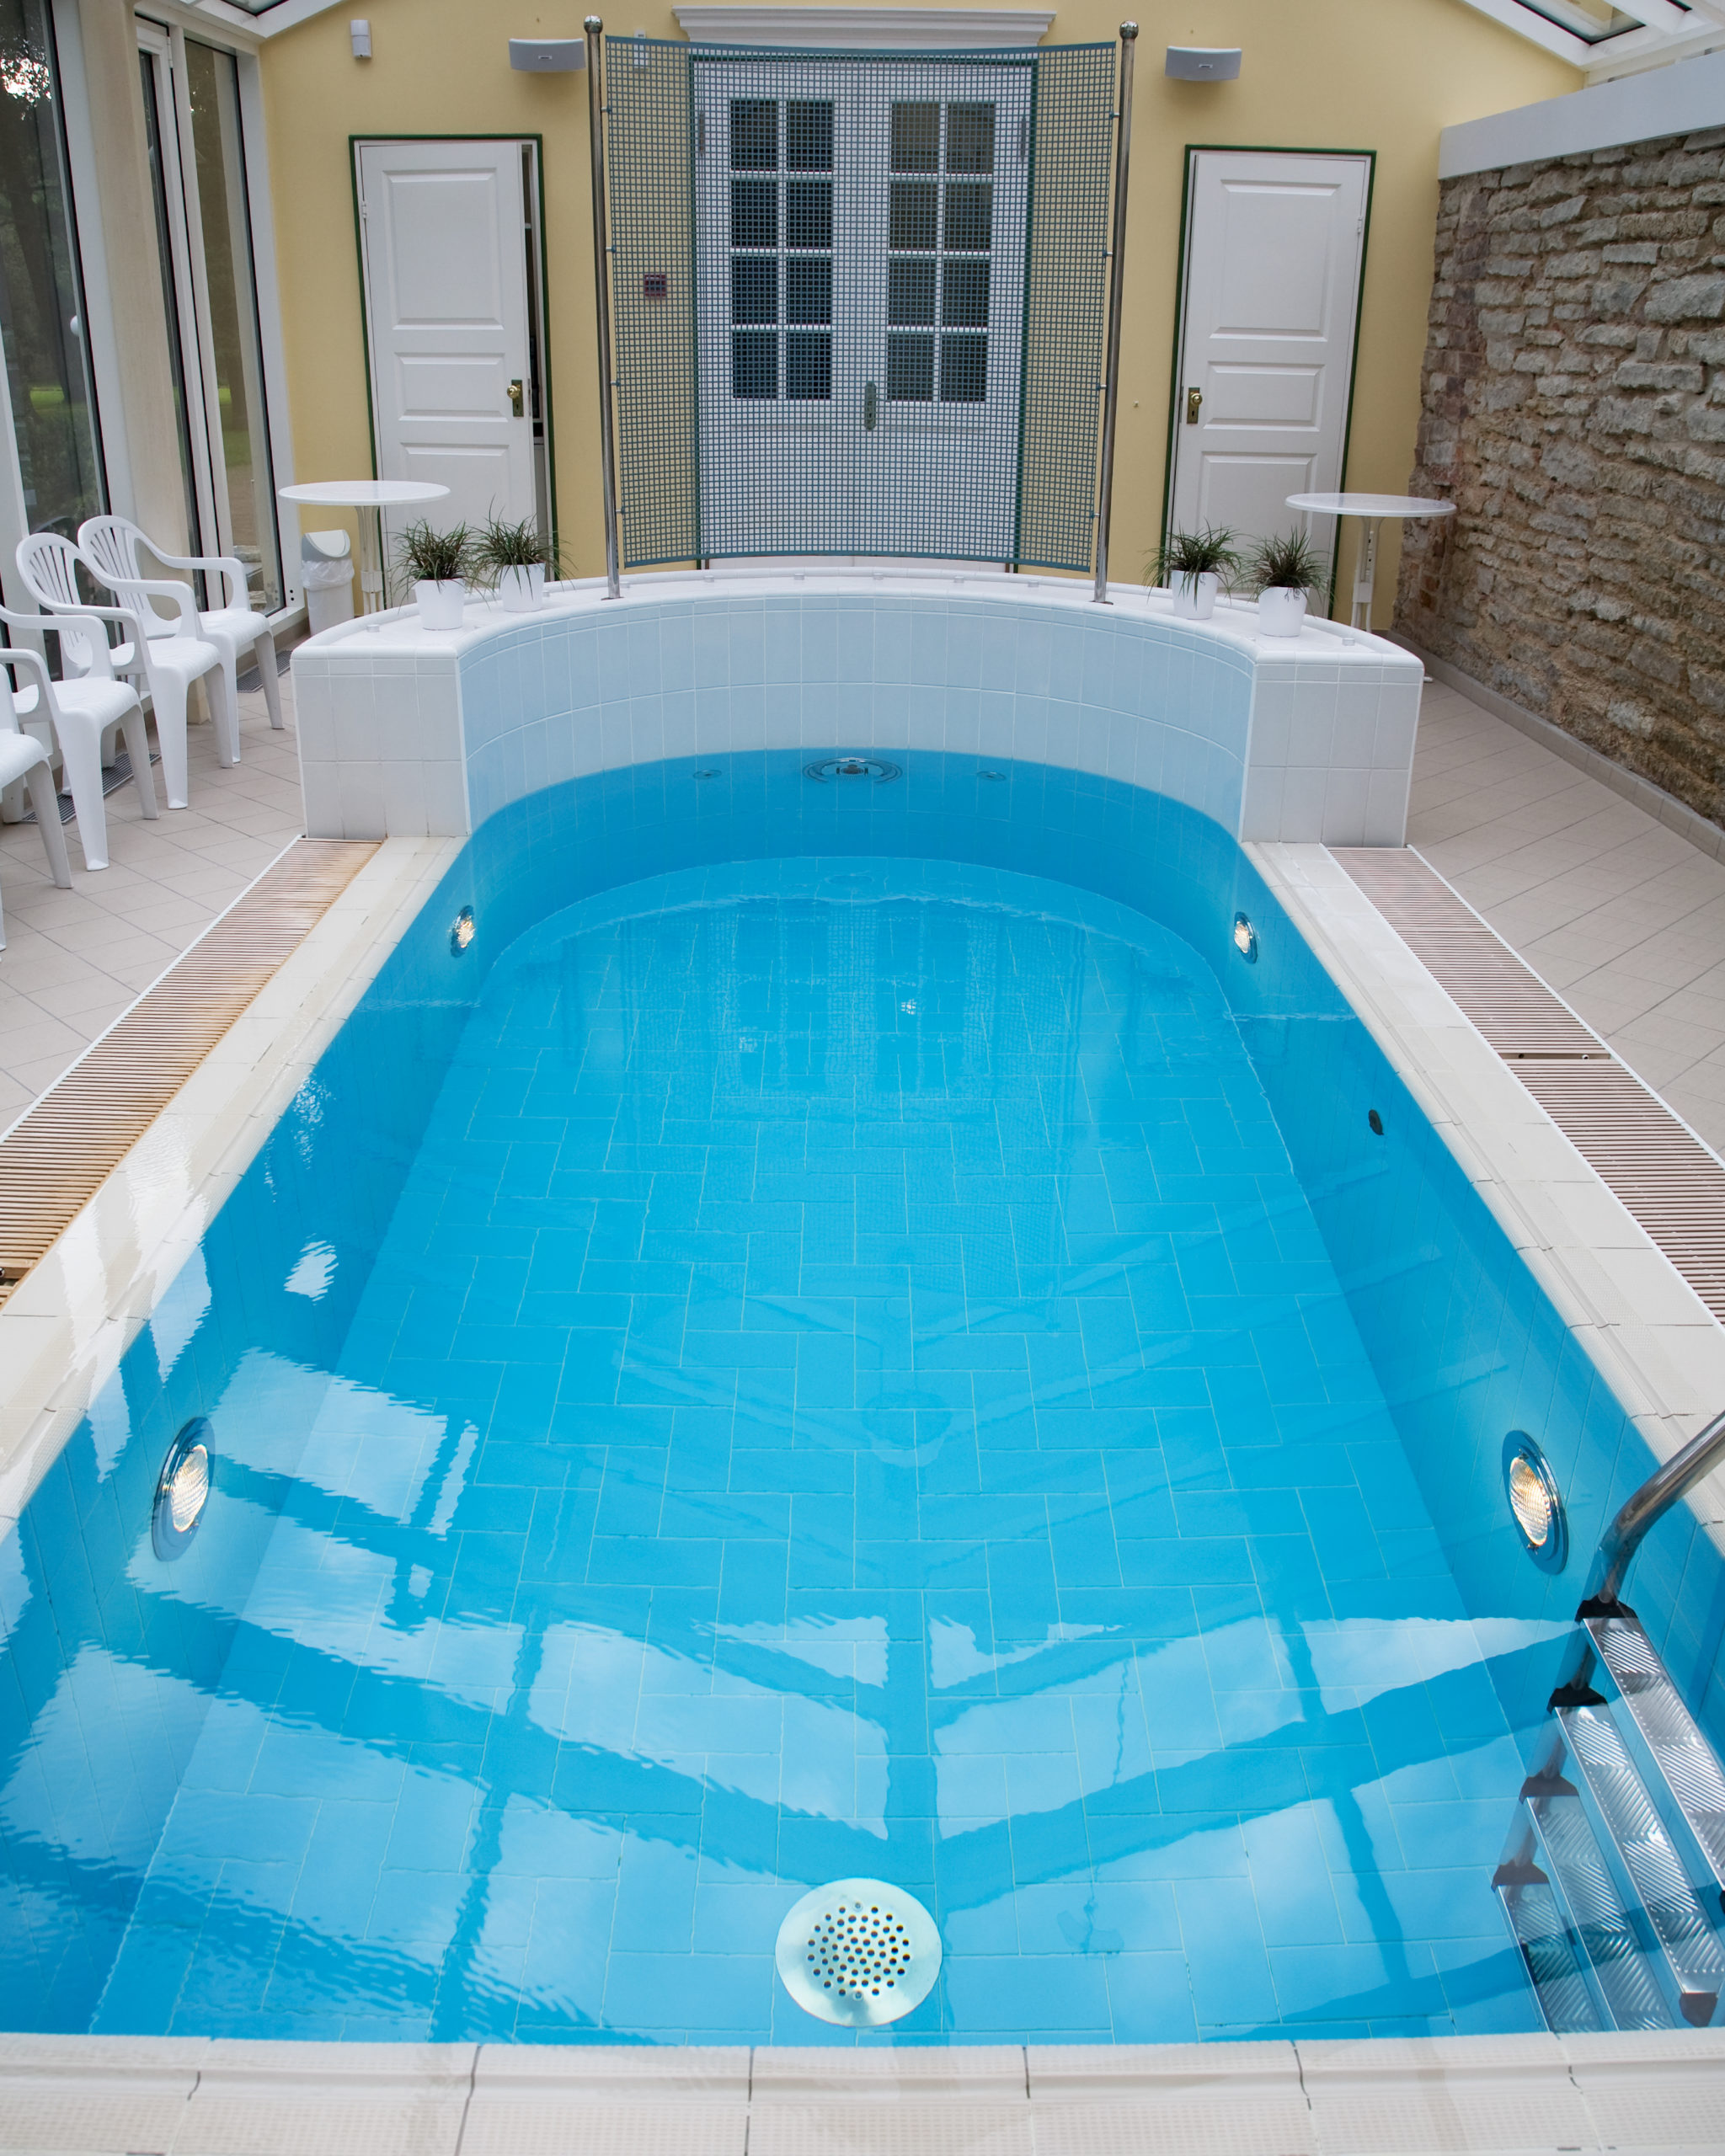 Ventilation system in an indoor pool area, ensuring proper air circulation and humidity control to maintain a comfortable and safe environment.